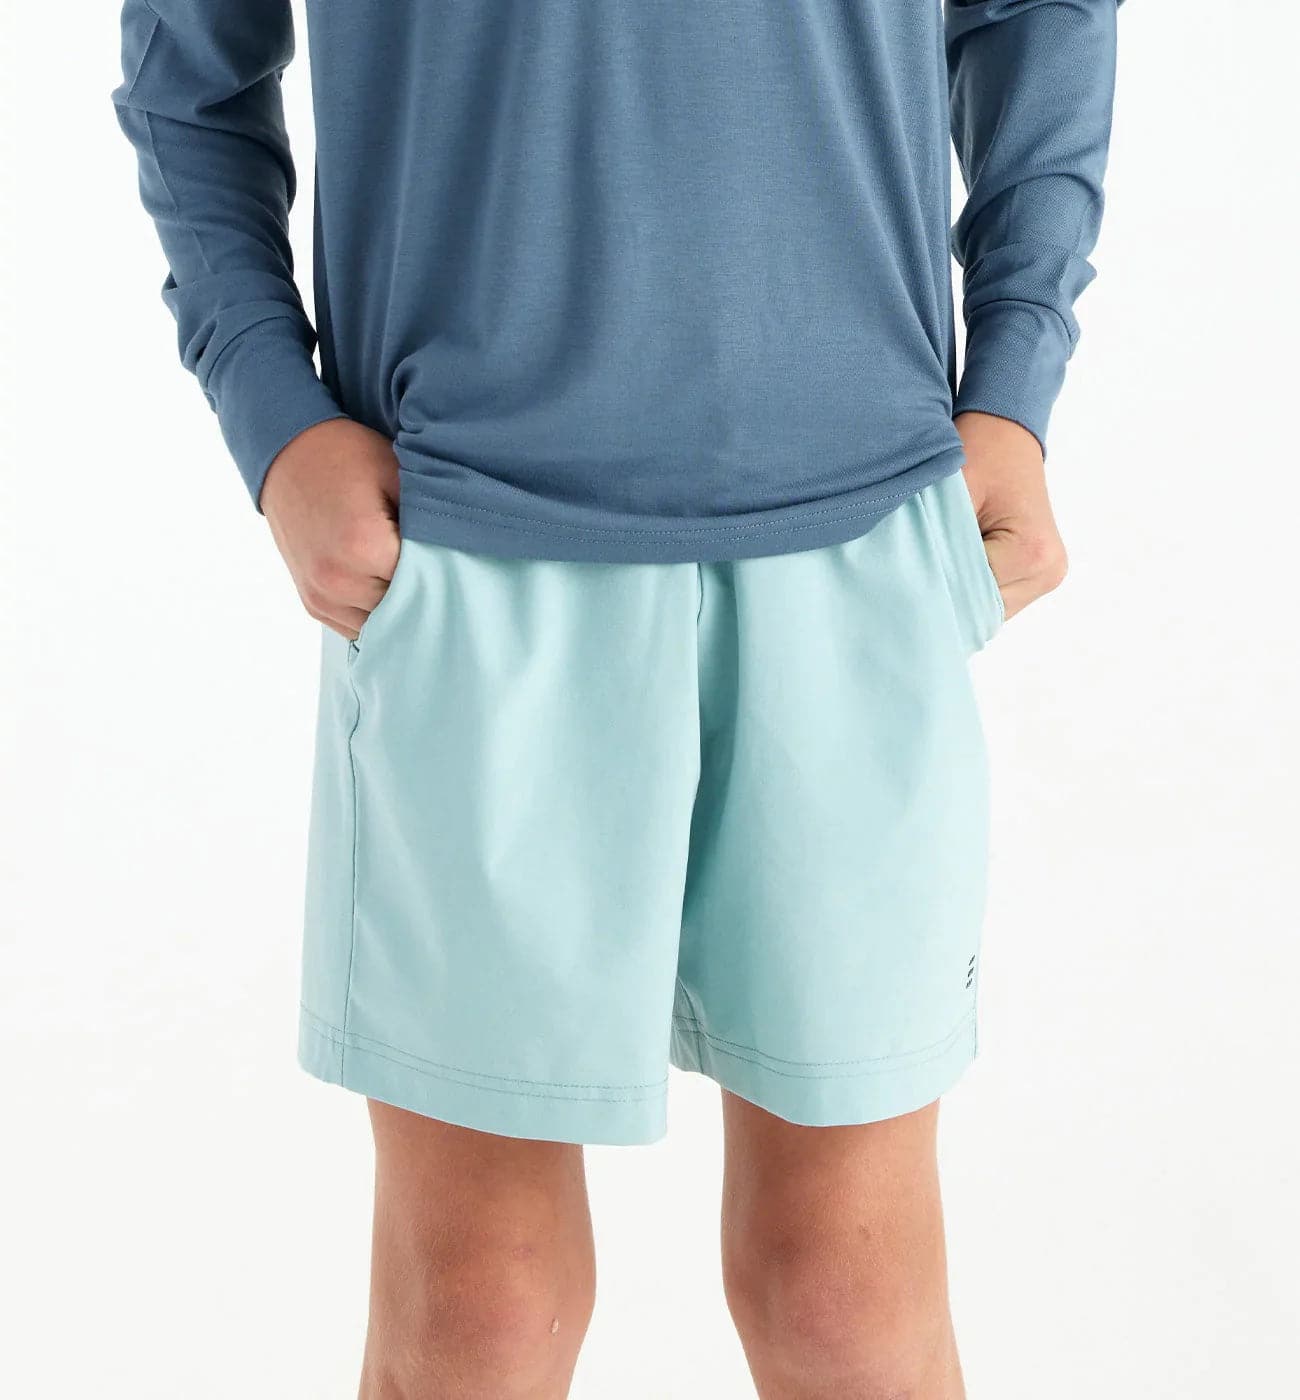 Featuring the Boys' Breeze Short kid's and babies, kid's thermal layering manufactured by Free Fly shown here from a second angle.